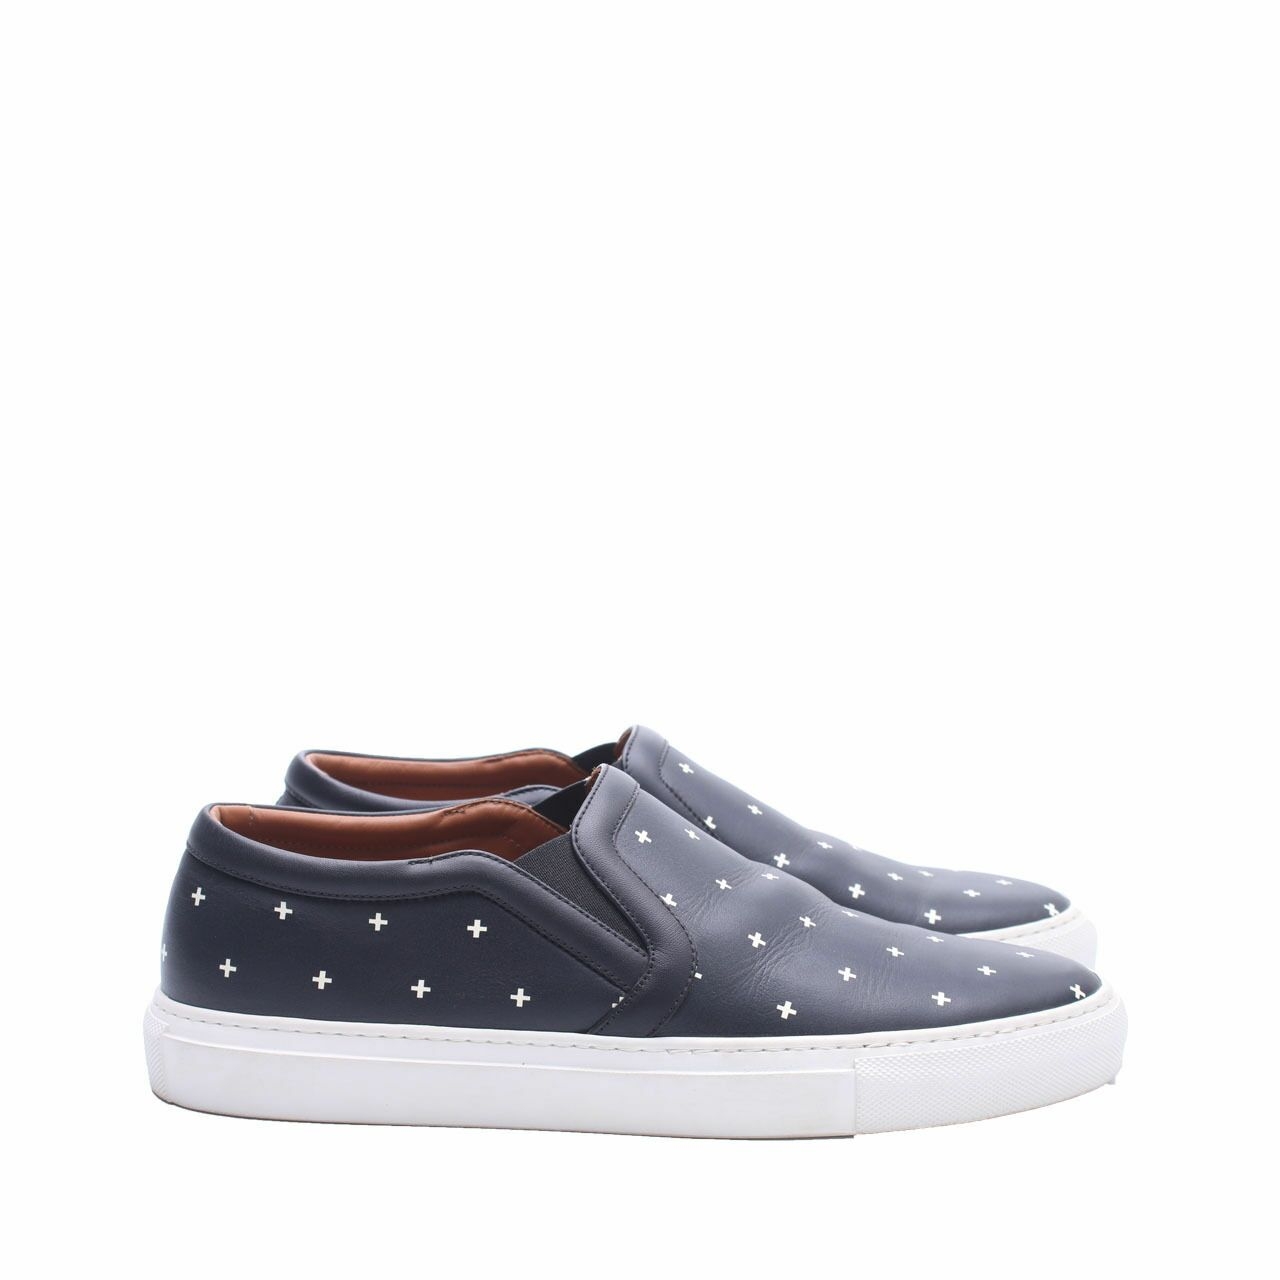 Givenchy Wiberlux Givenchy Cross Print Real Leather Slip-On Sneakers